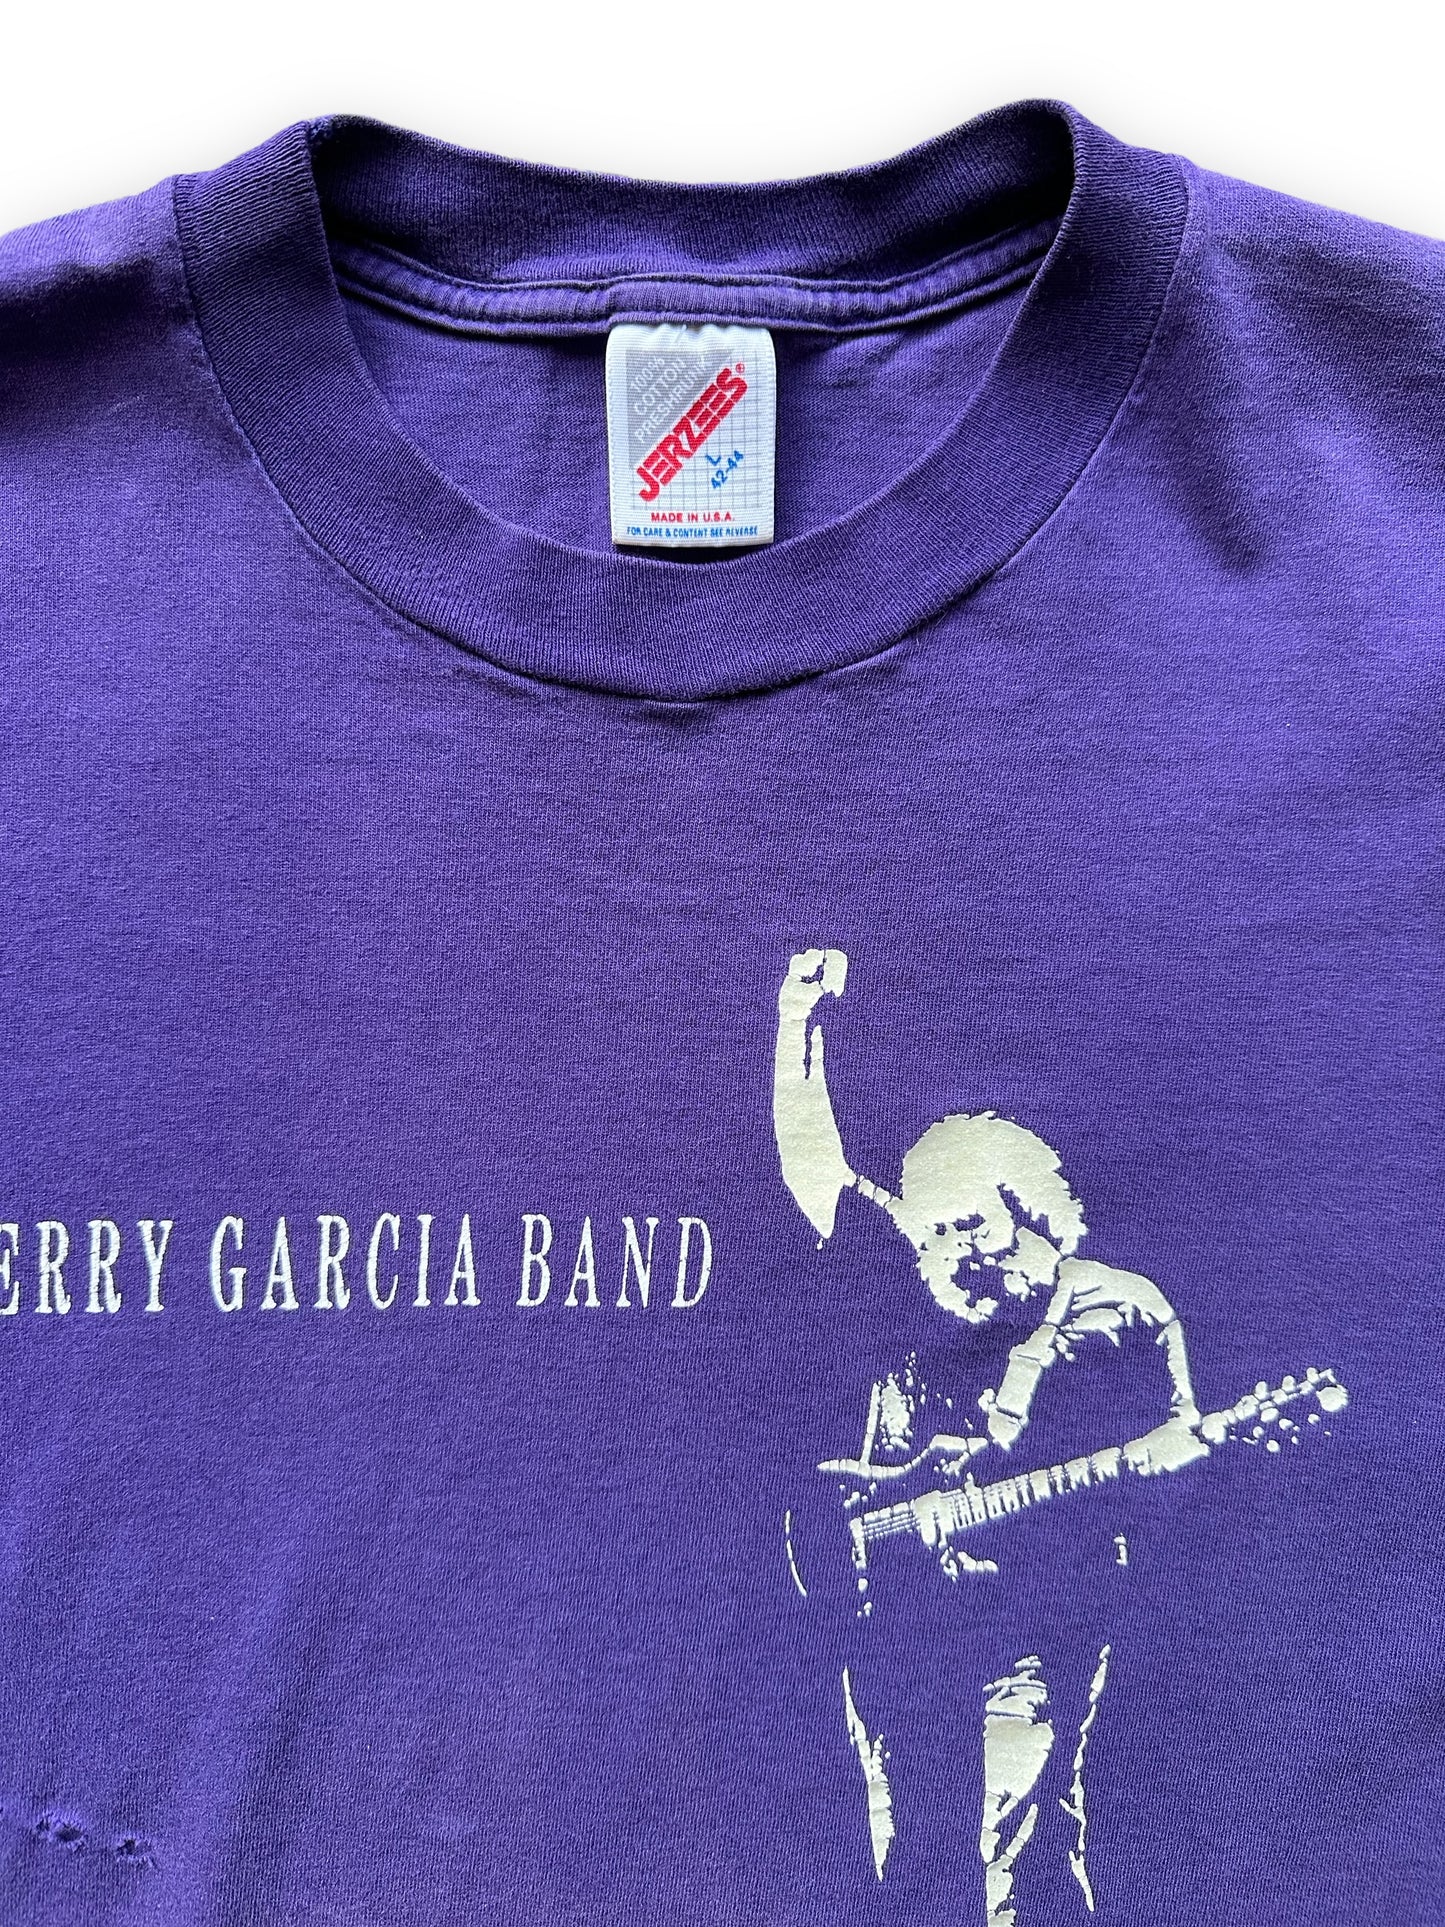 Upper Front View of Vintage Jerry Garcia Band Tour Tee Tee SZ L |  Vintage Grateful Dead Tee Seattle | Barn Owl Vintage